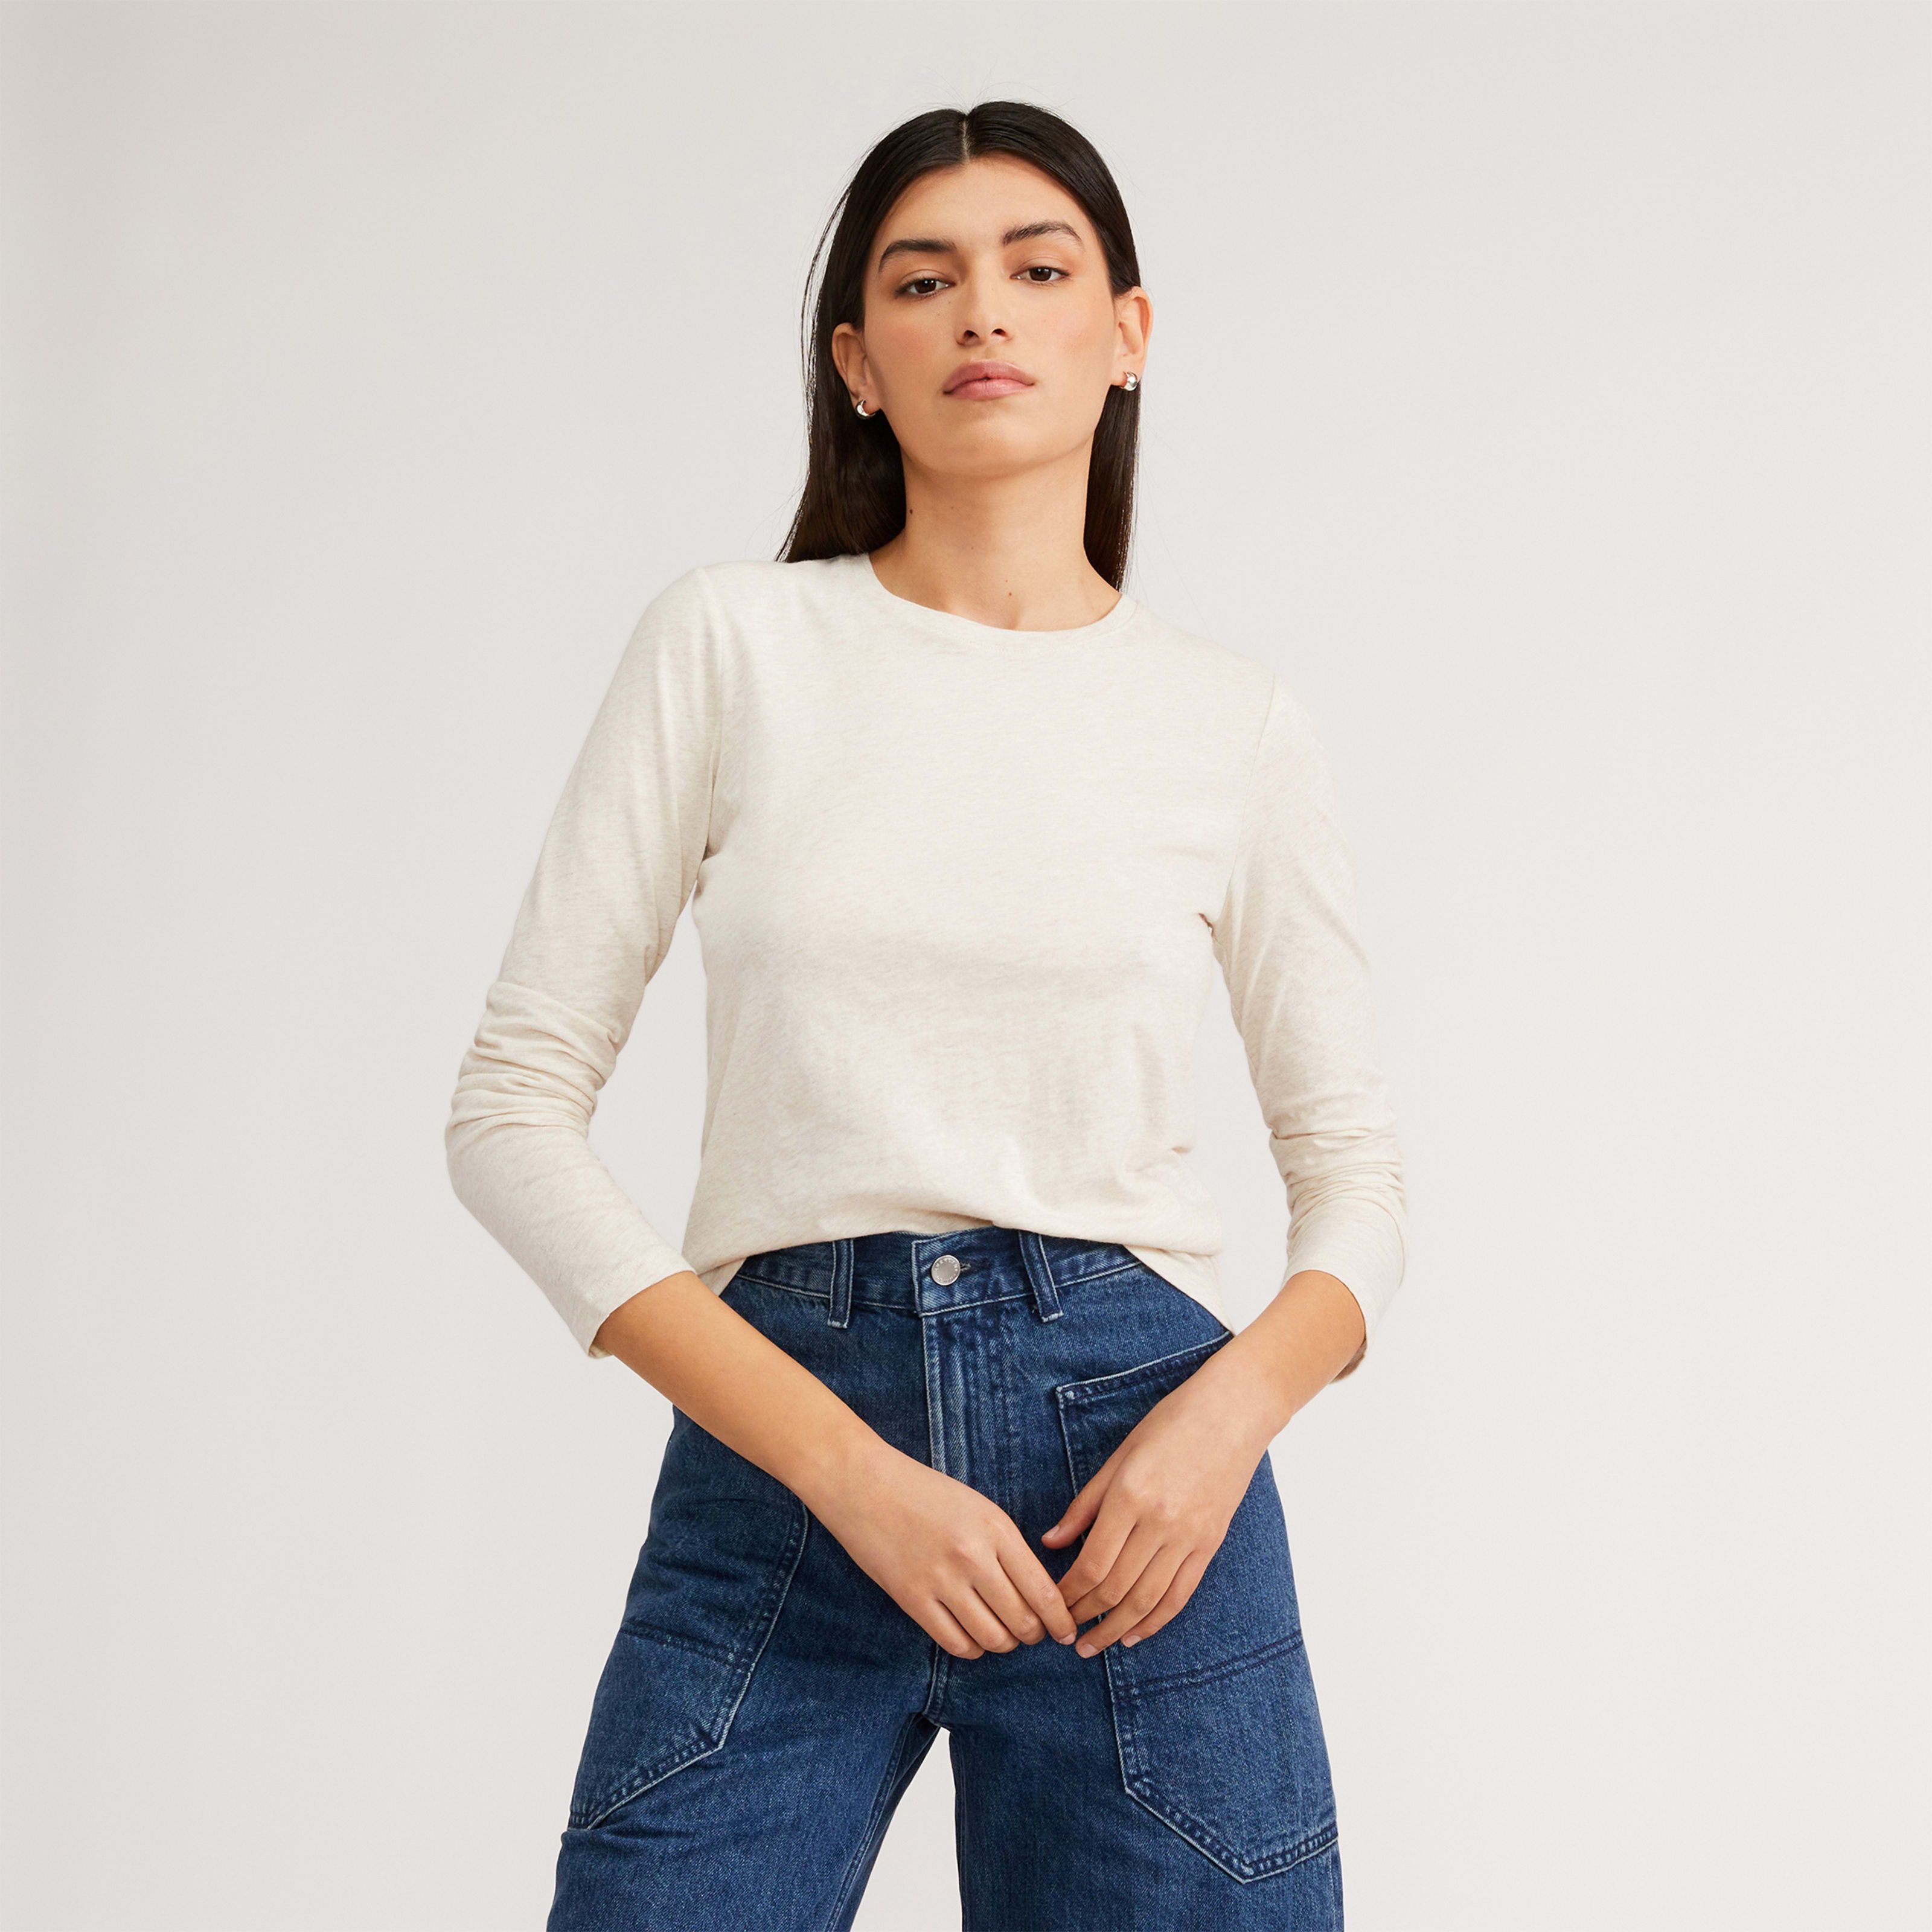 Women's Organic Cotton Long-Sleeve Crew Sweater by Everlane in Oatmeal, Size S | Everlane